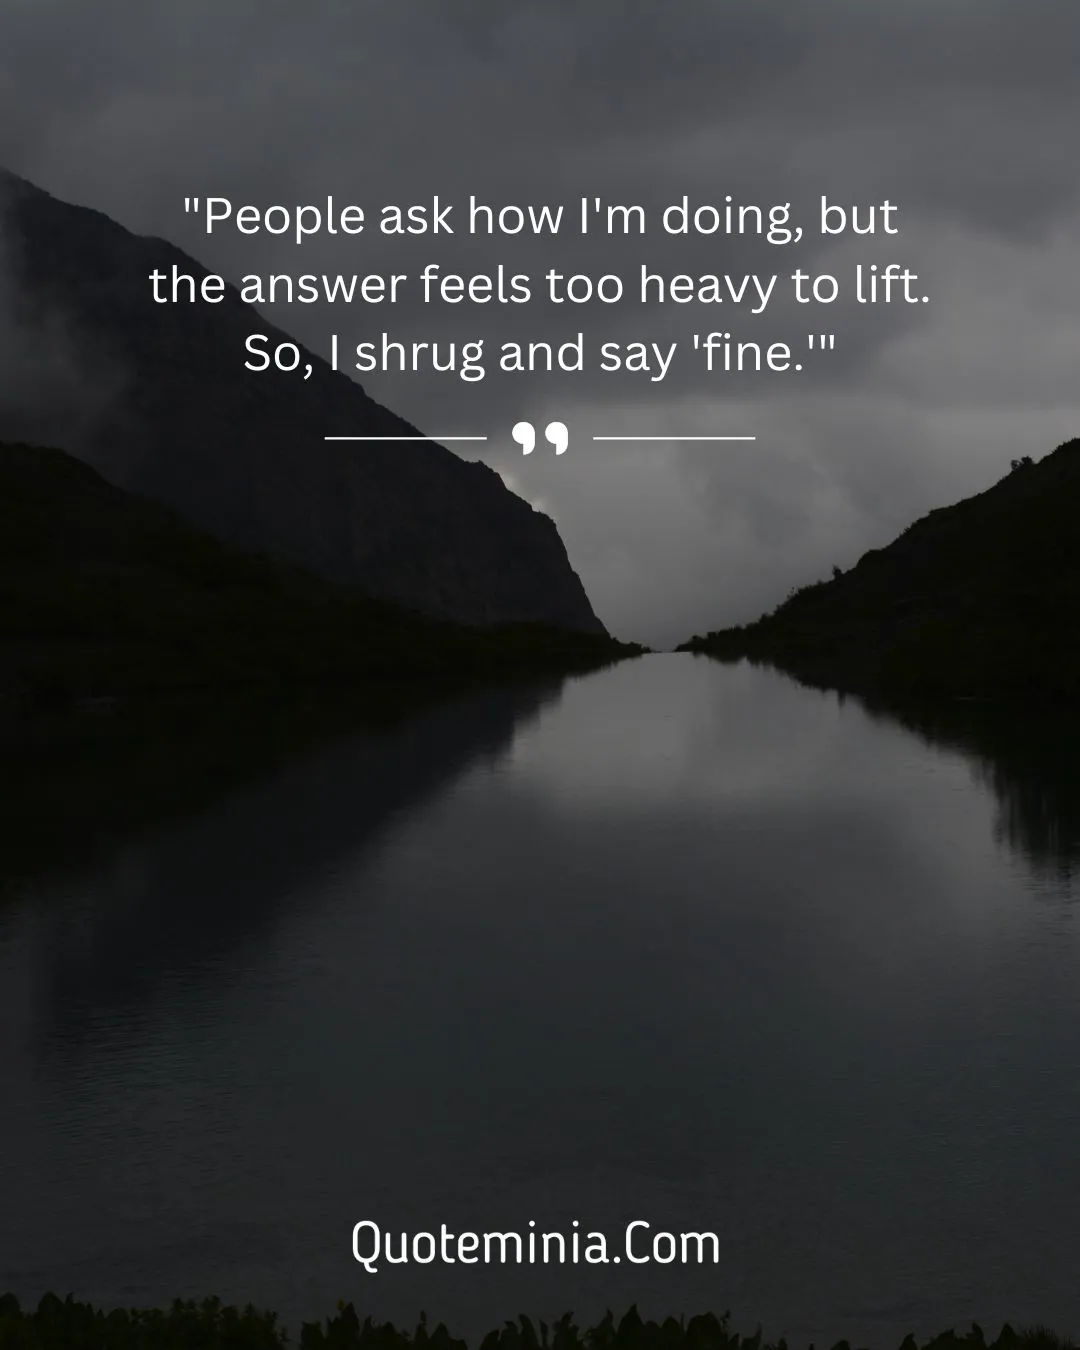 Suffering in Silence Depression Quotes Image 1